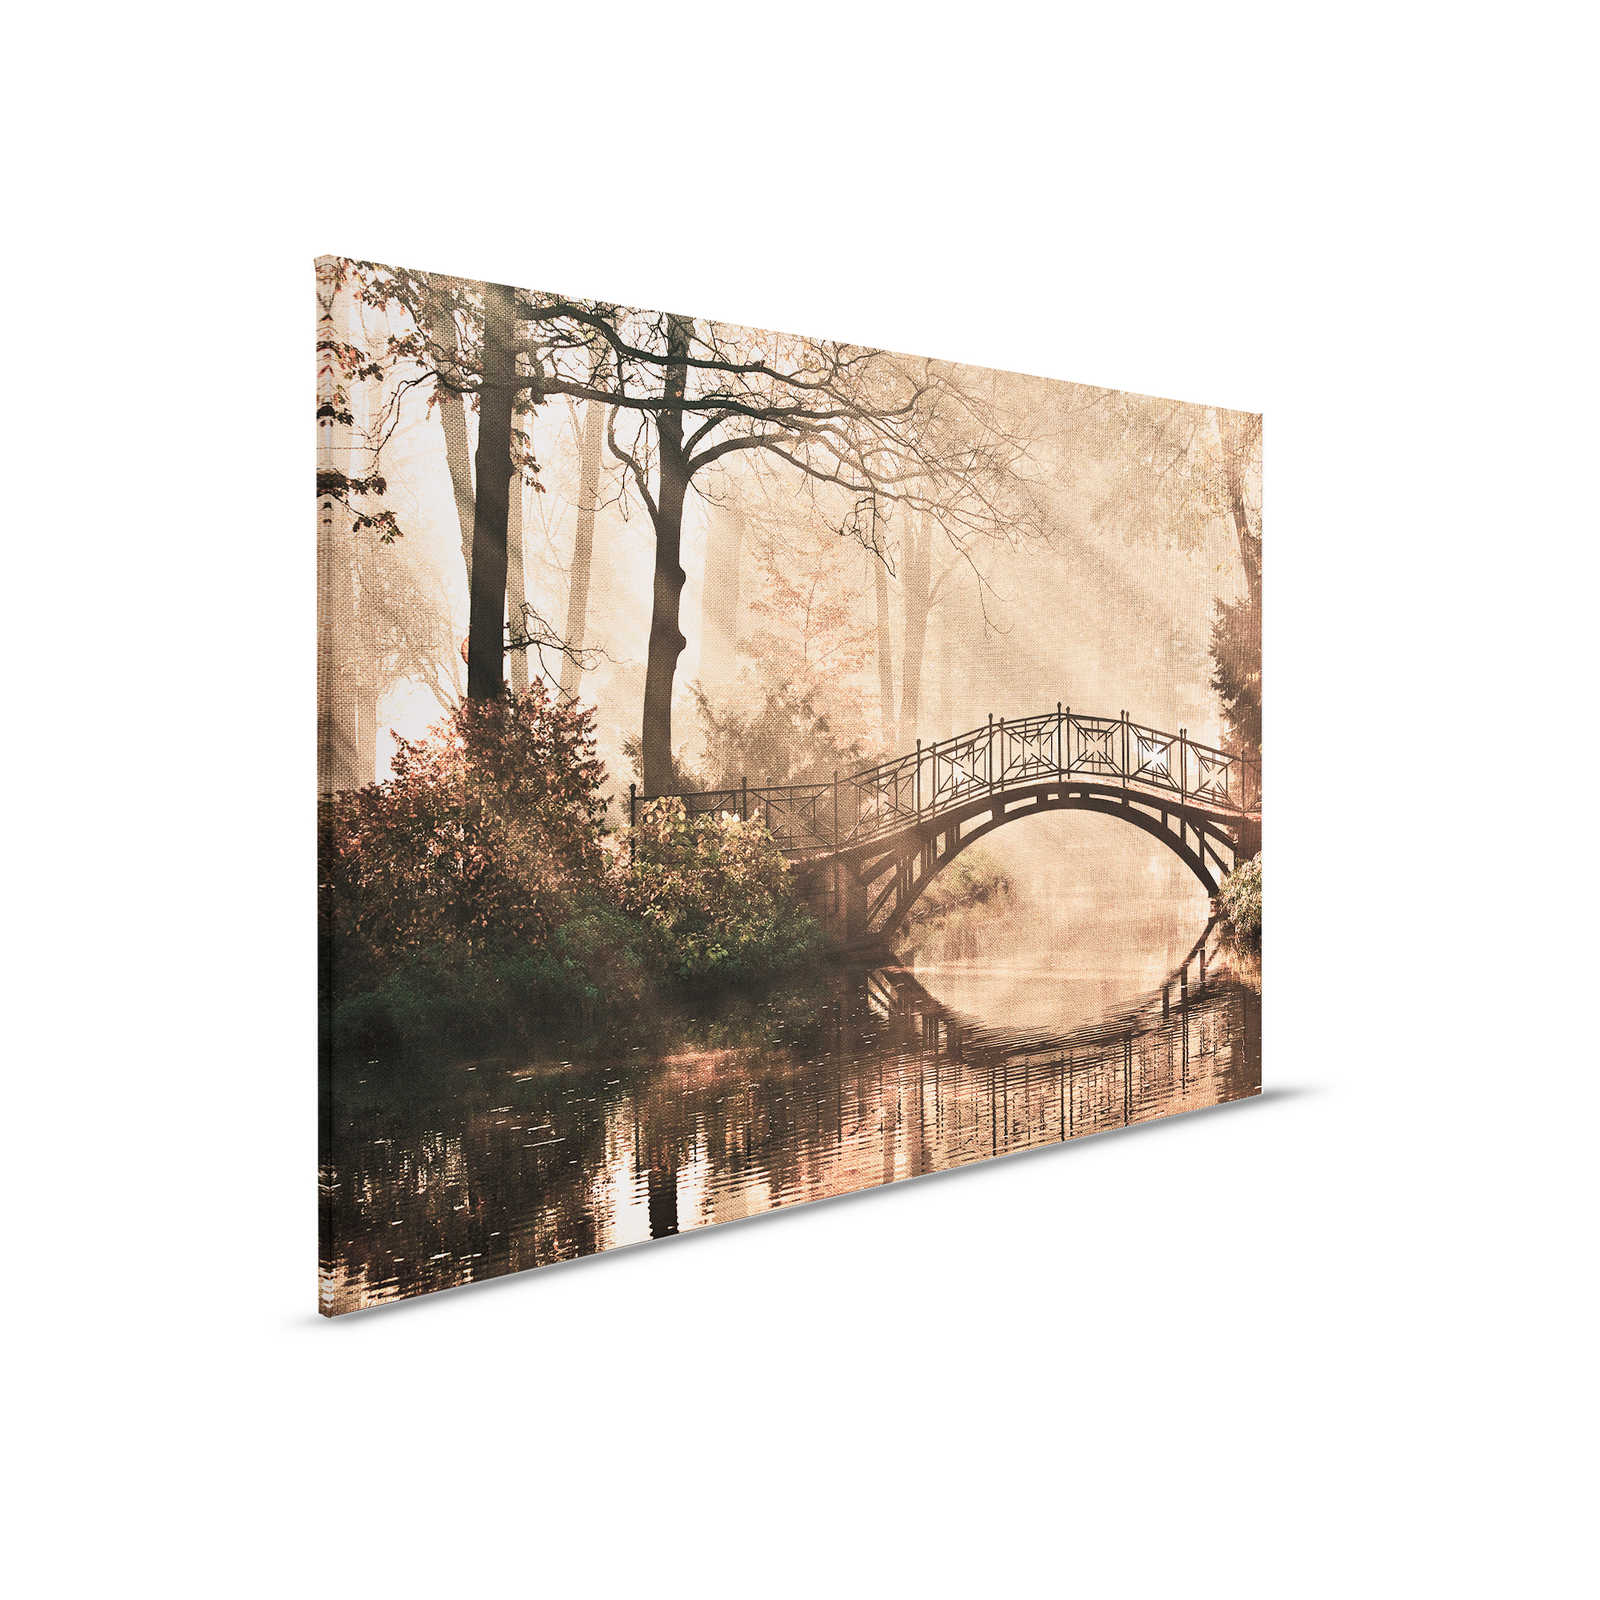 Canvas with Foliage Forest with River & Bridge - 0.90 m x 0.60 m
